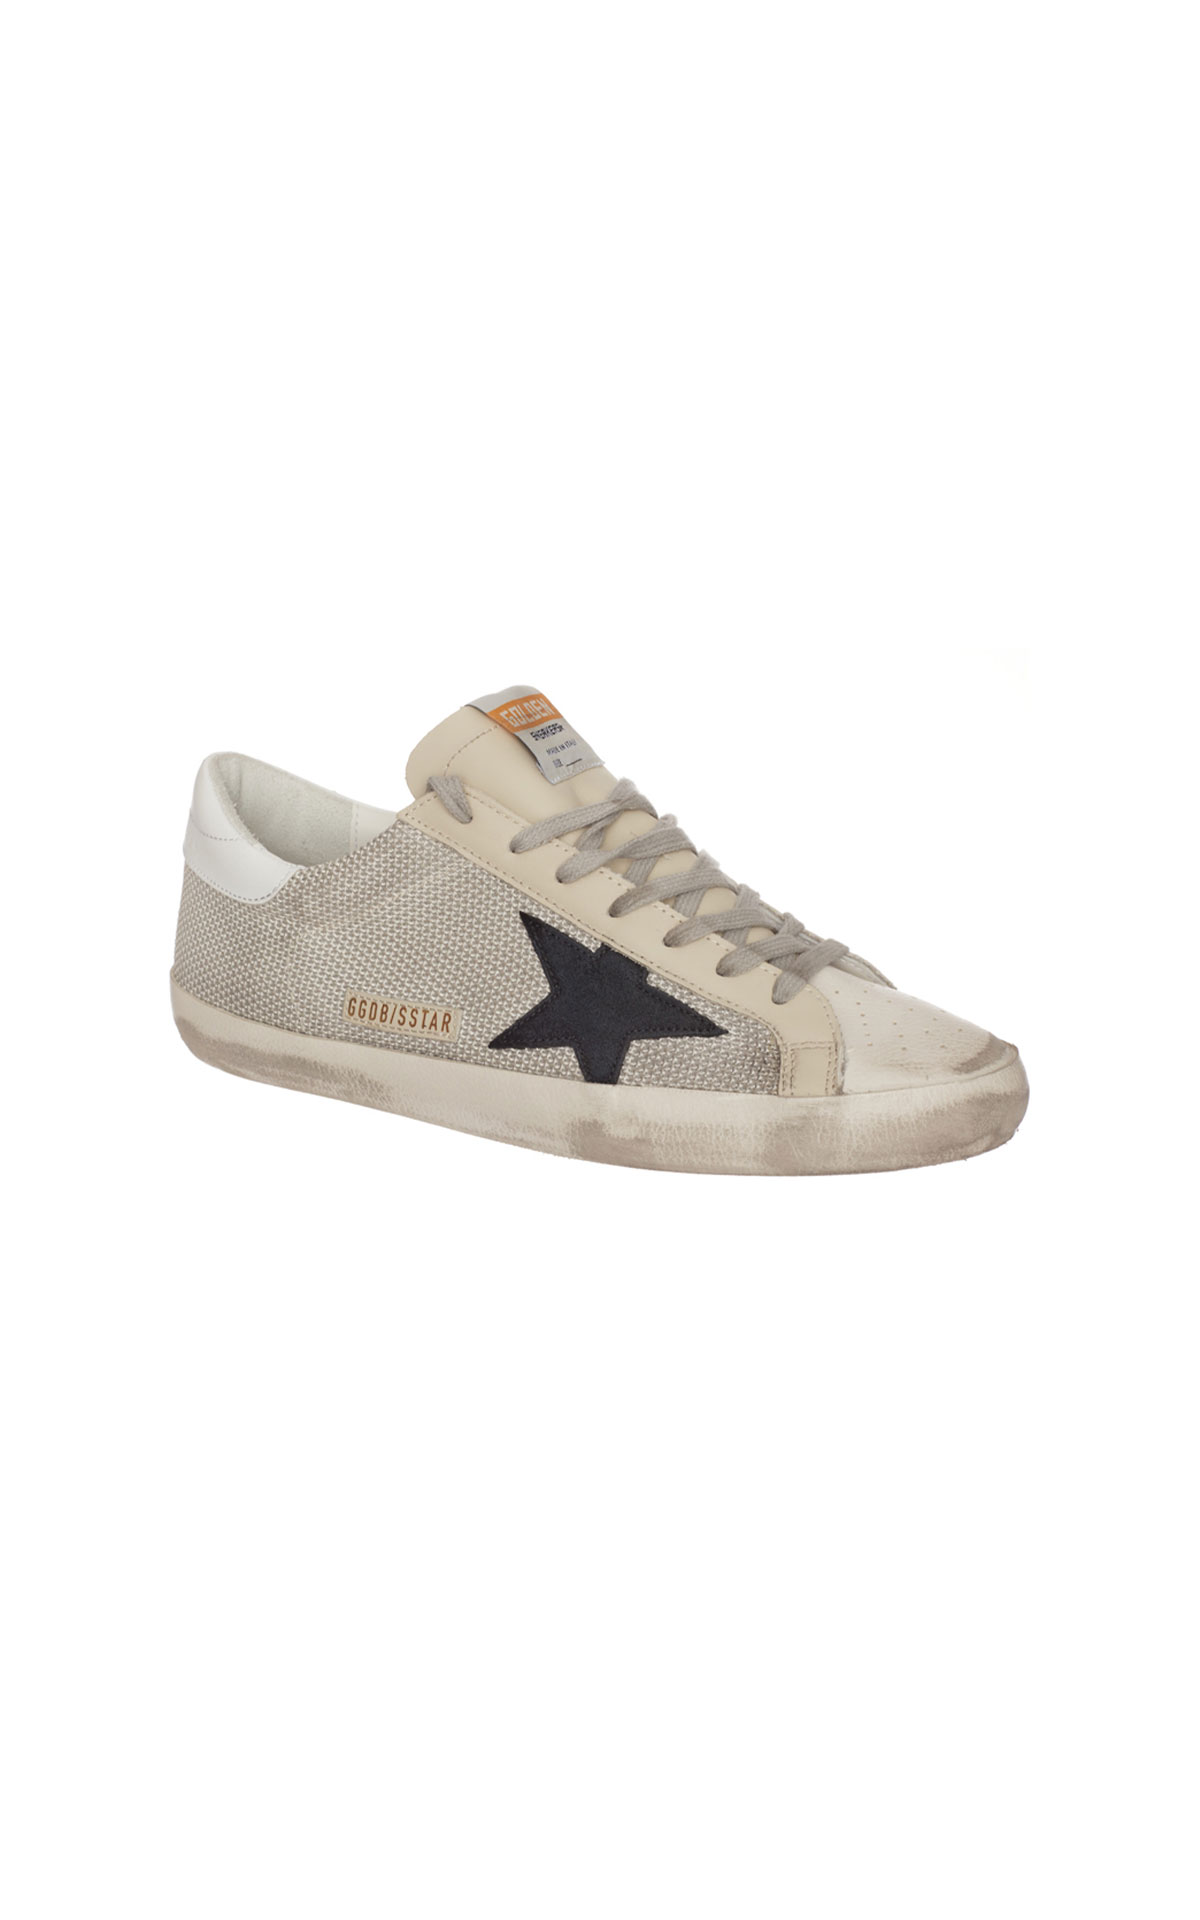 Golden Goose Superstar sneakers in leather from Bicester Village